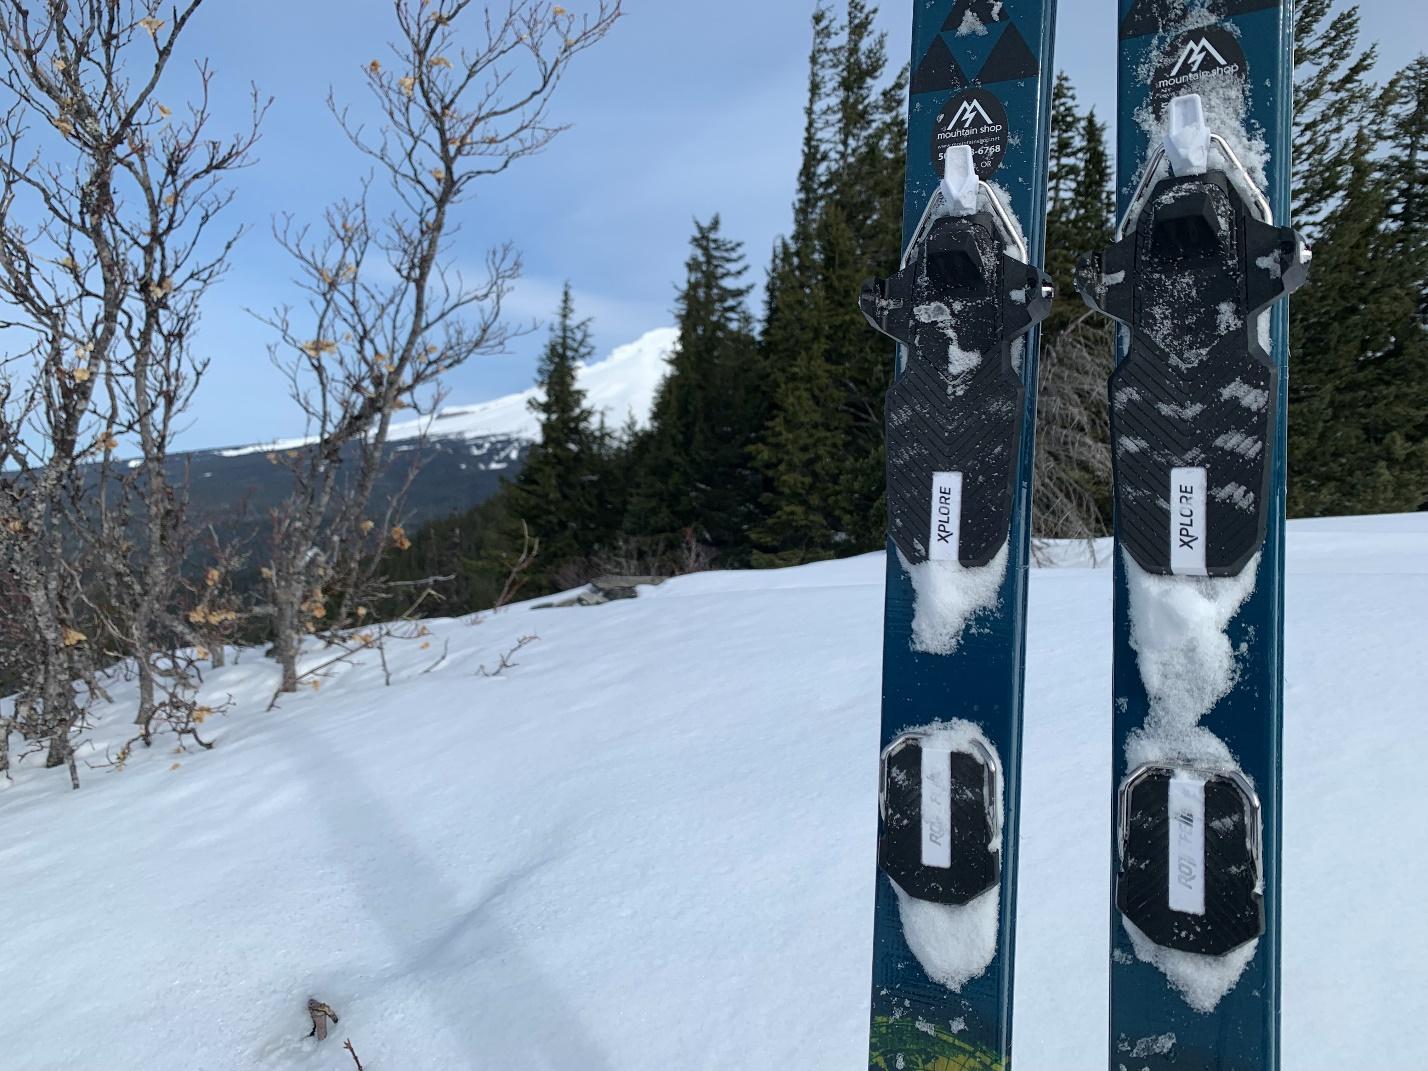 A pair of snowboards leaning against a post in the snow

Description automatically generated with low confidence